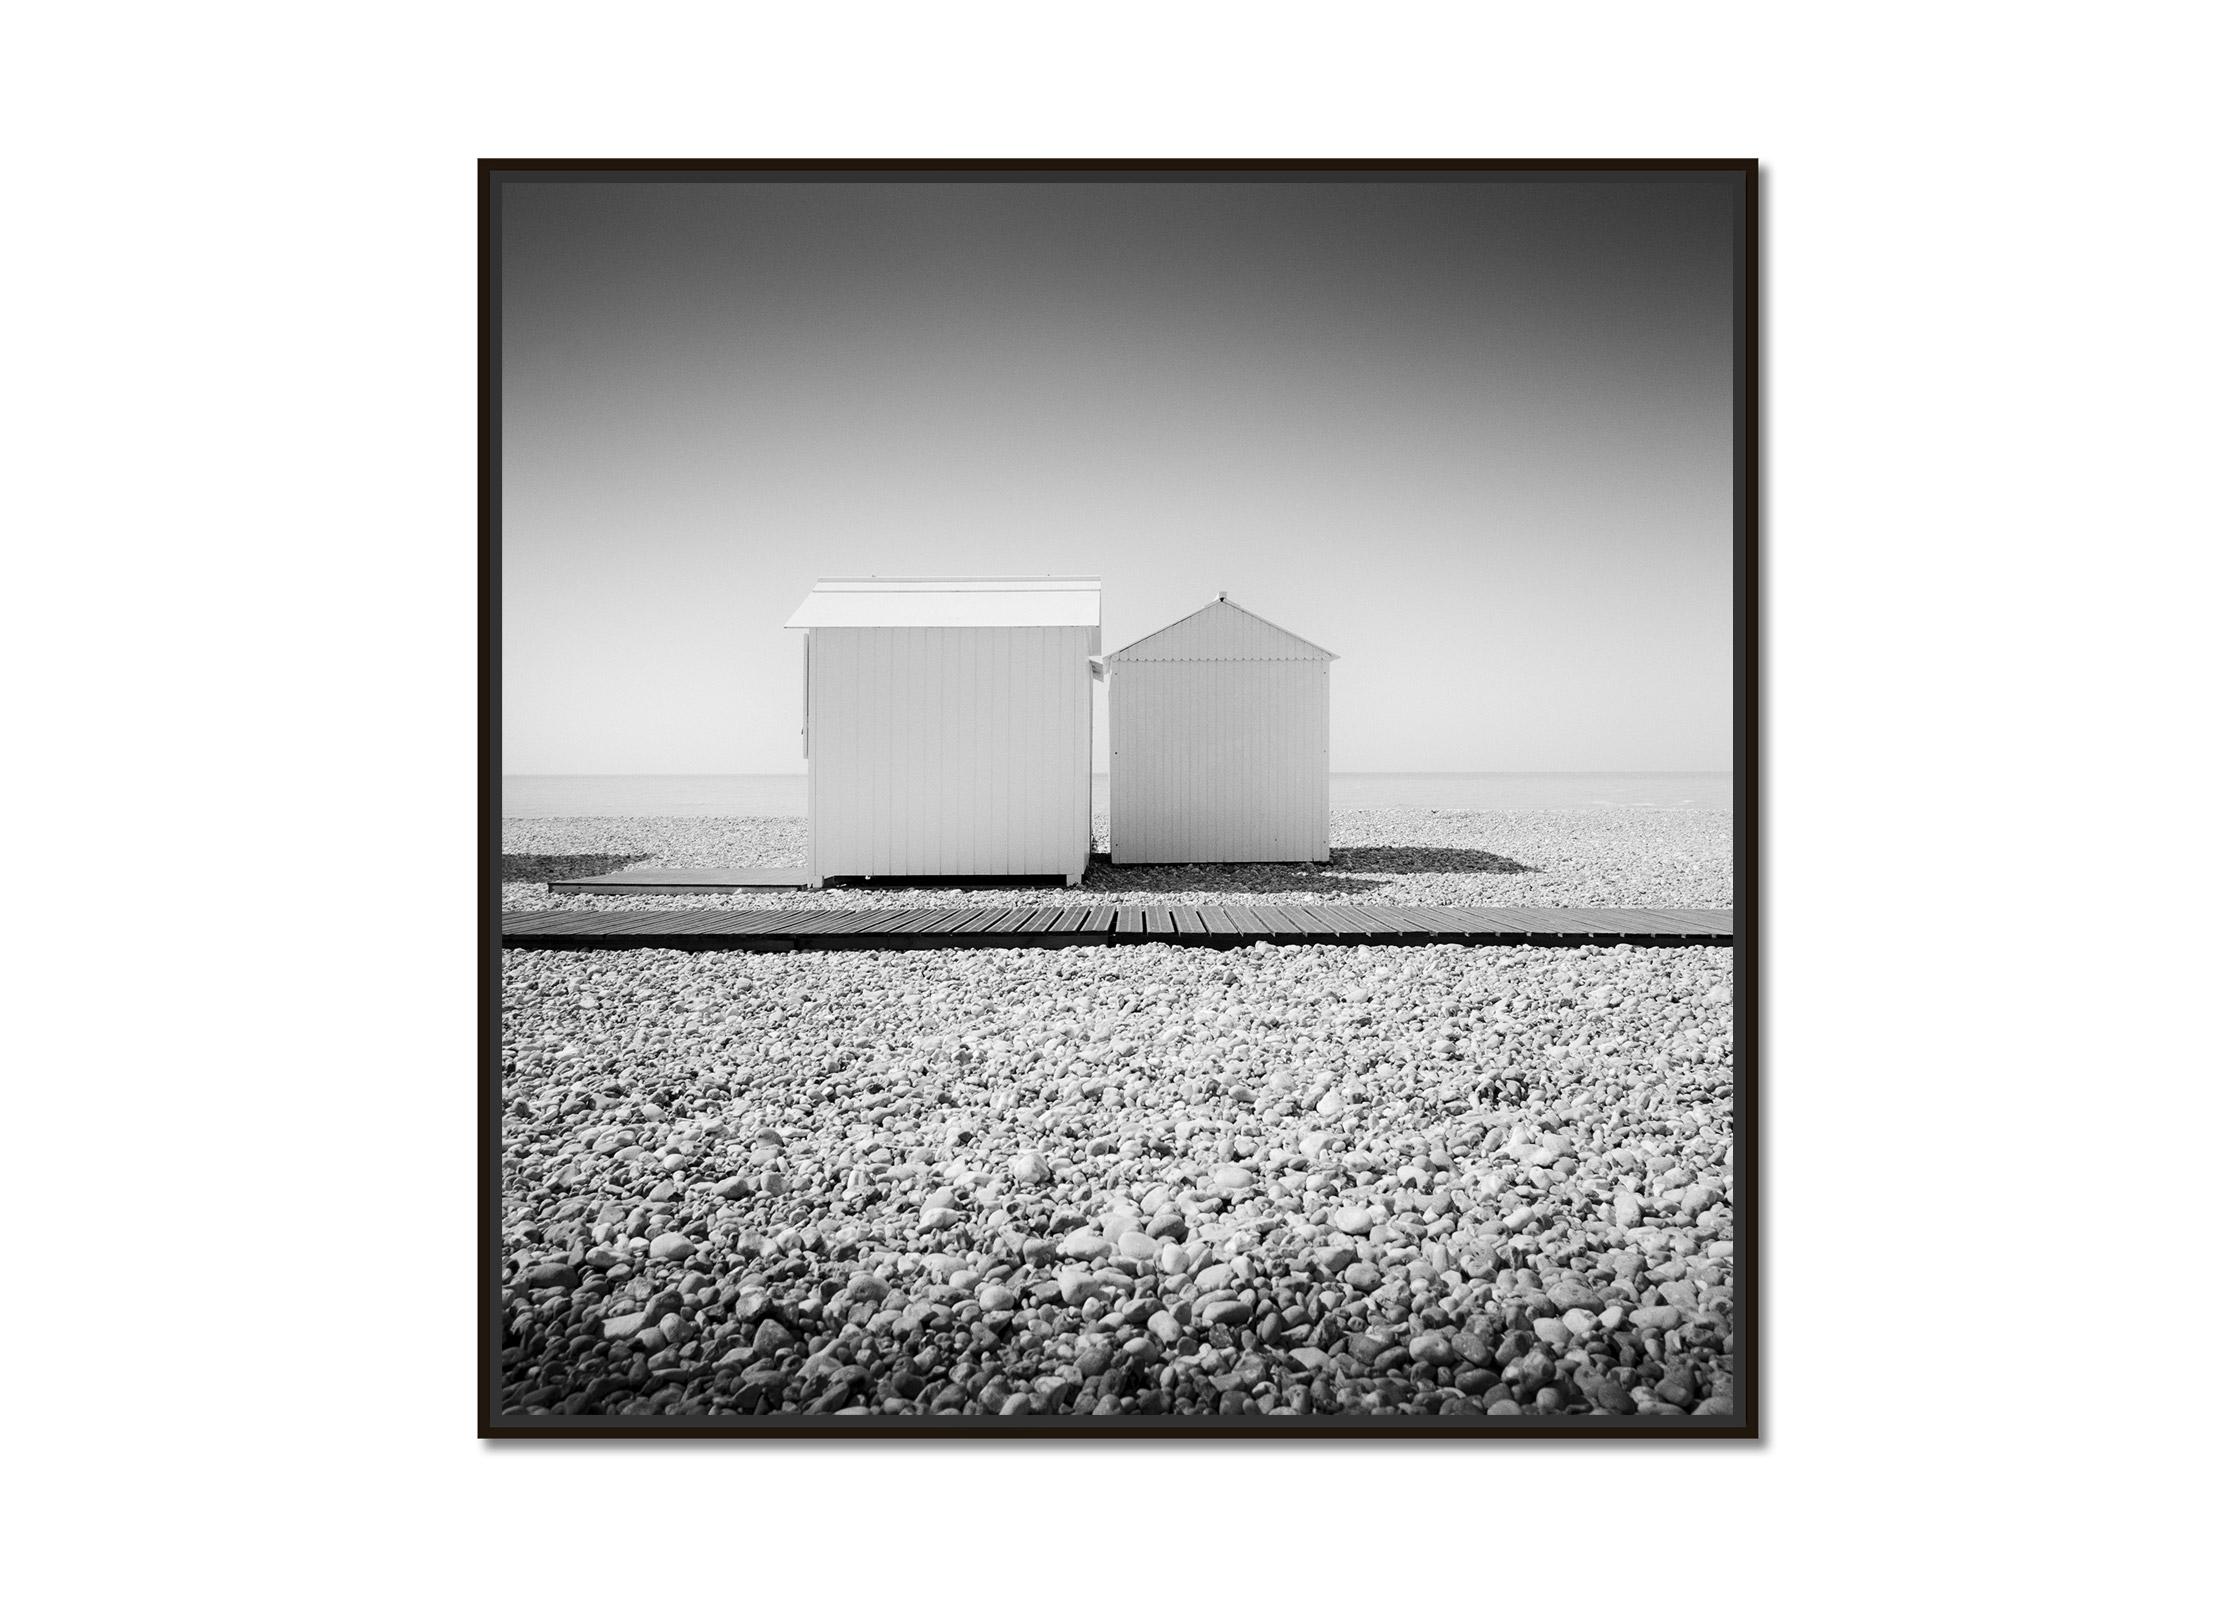 Normandy Beach Huts, France, black and white fine art landscape photography - Photograph by Gerald Berghammer